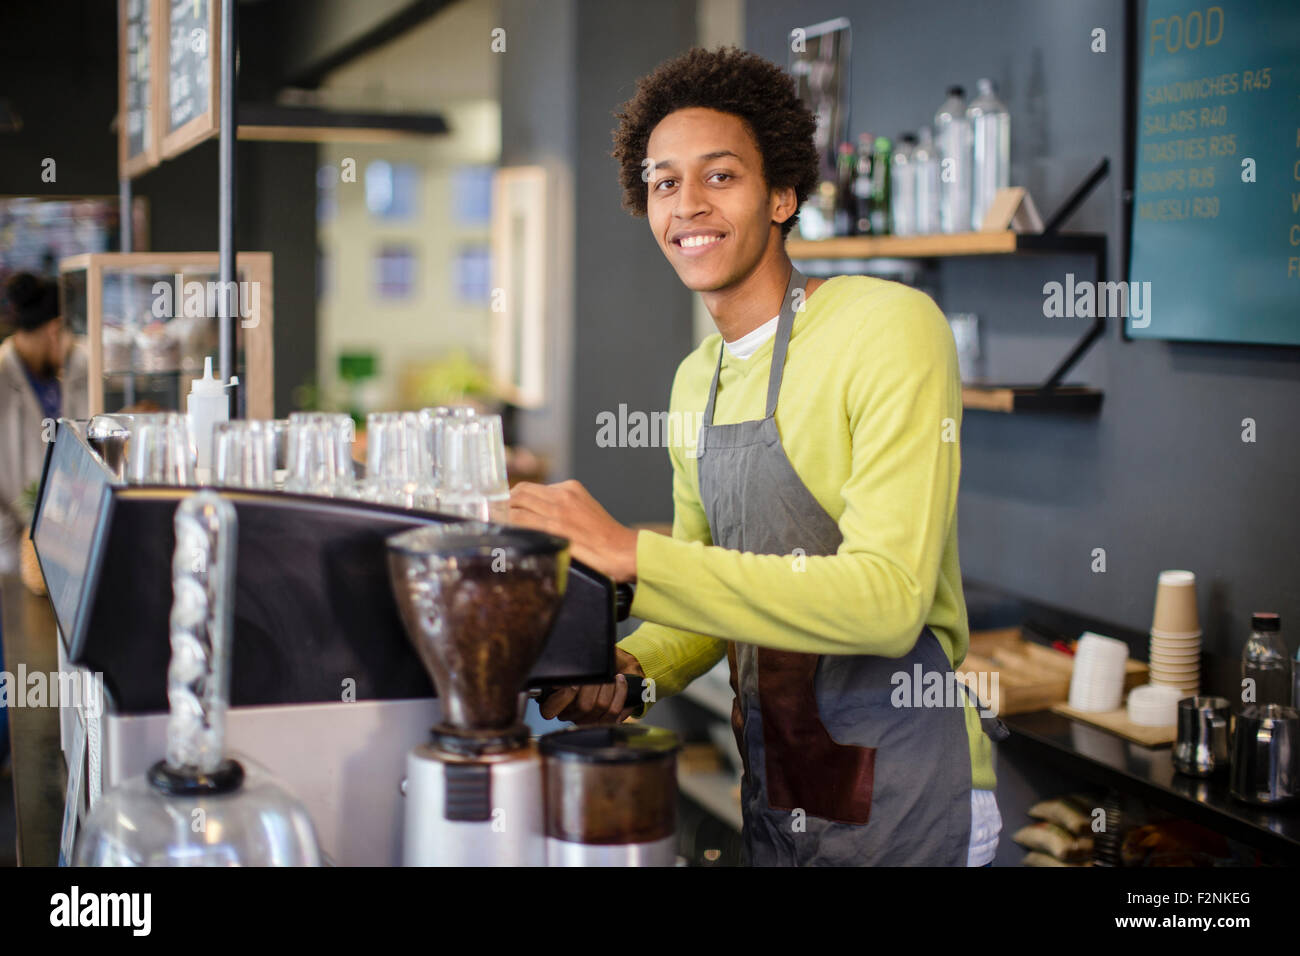 Mixed Race barista working in coffee shop Banque D'Images